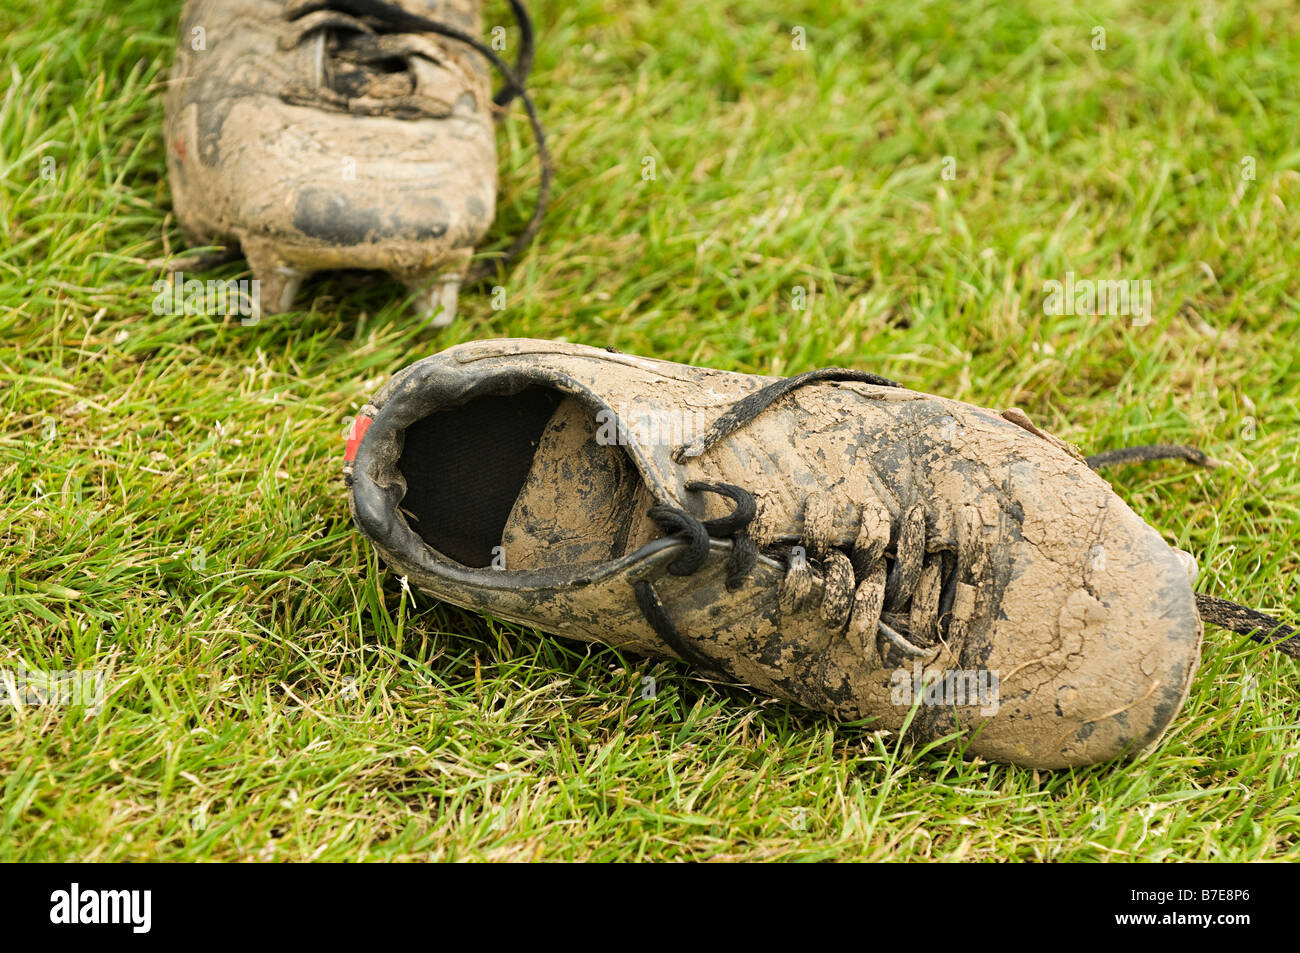 Dirty Football Boots High Resolution Stock Photography and Images - Alamy